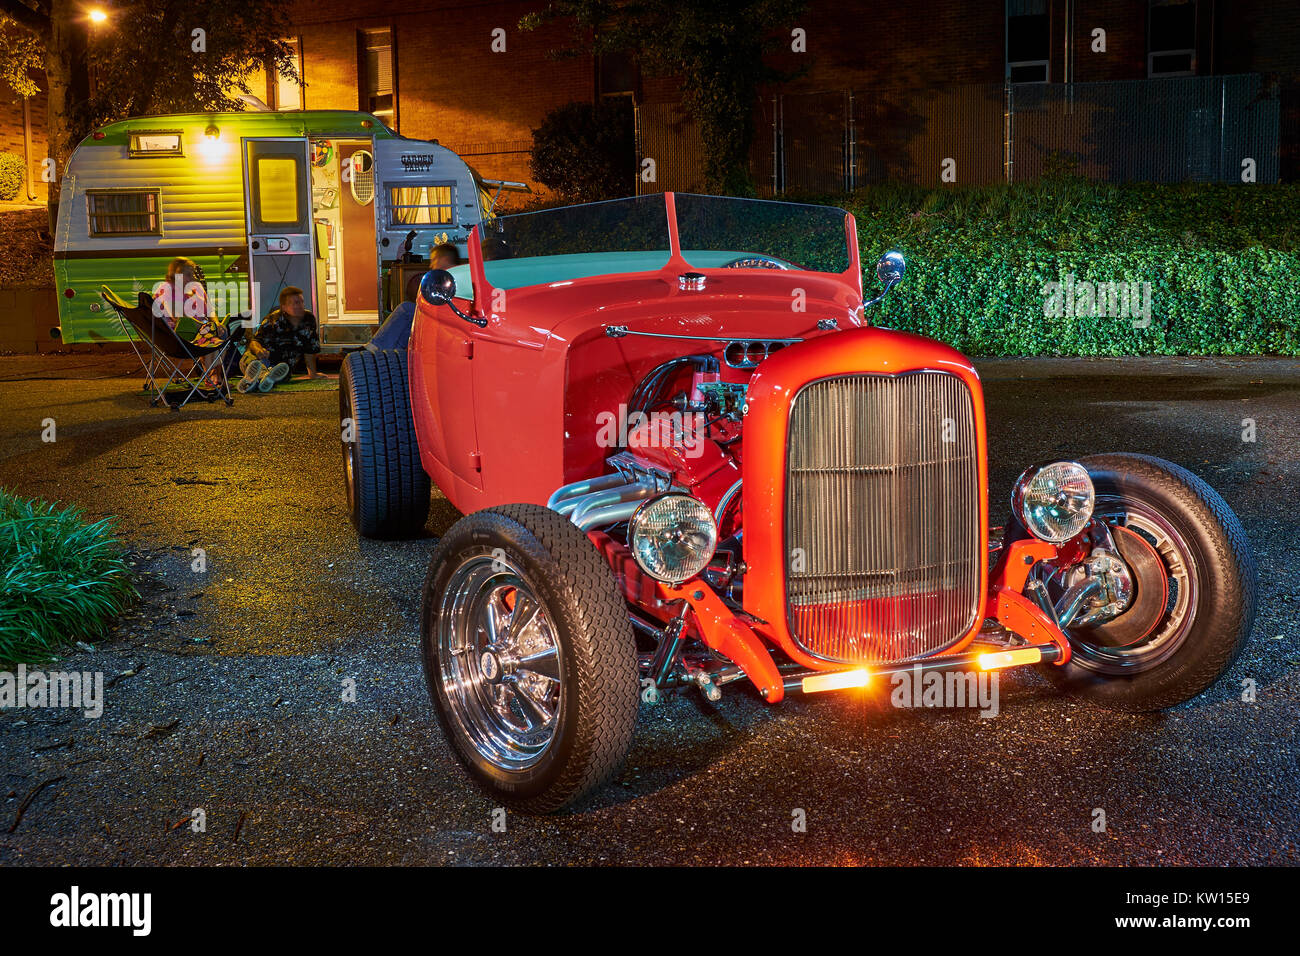 1932 red Ford hot rod roadster at night with camper trailer and people relaxing in the background at night. Stock Photo